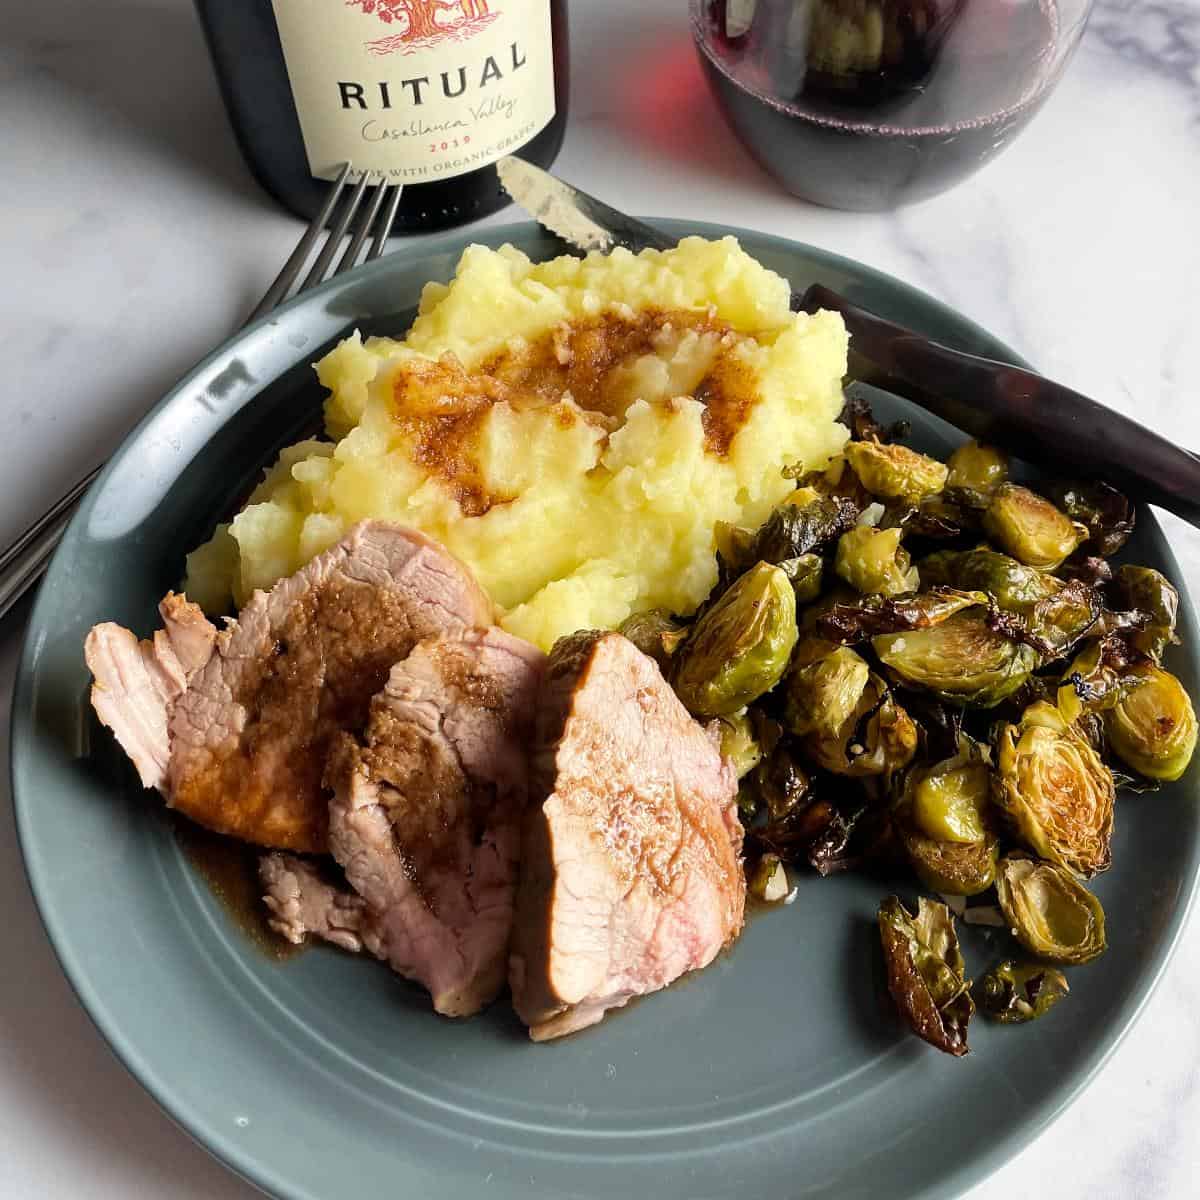 Slices of pork tenderloin plated with mashed potato and roasted Brussels sprouts, and some Ritual Pinot Noir red wine in the background.